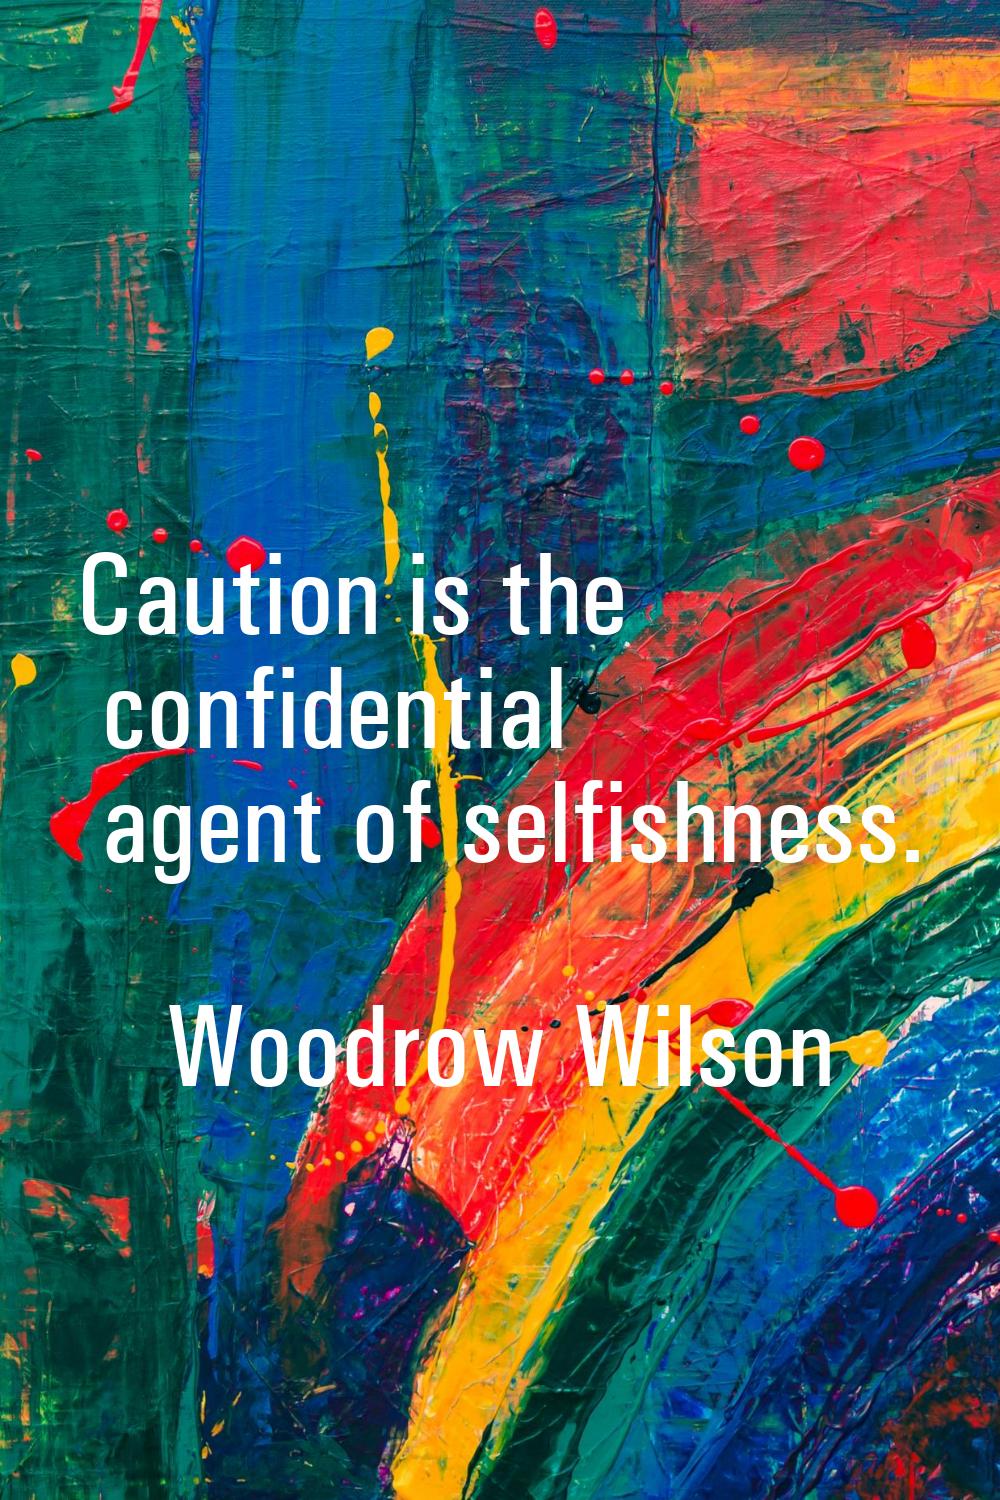 Caution is the confidential agent of selfishness.